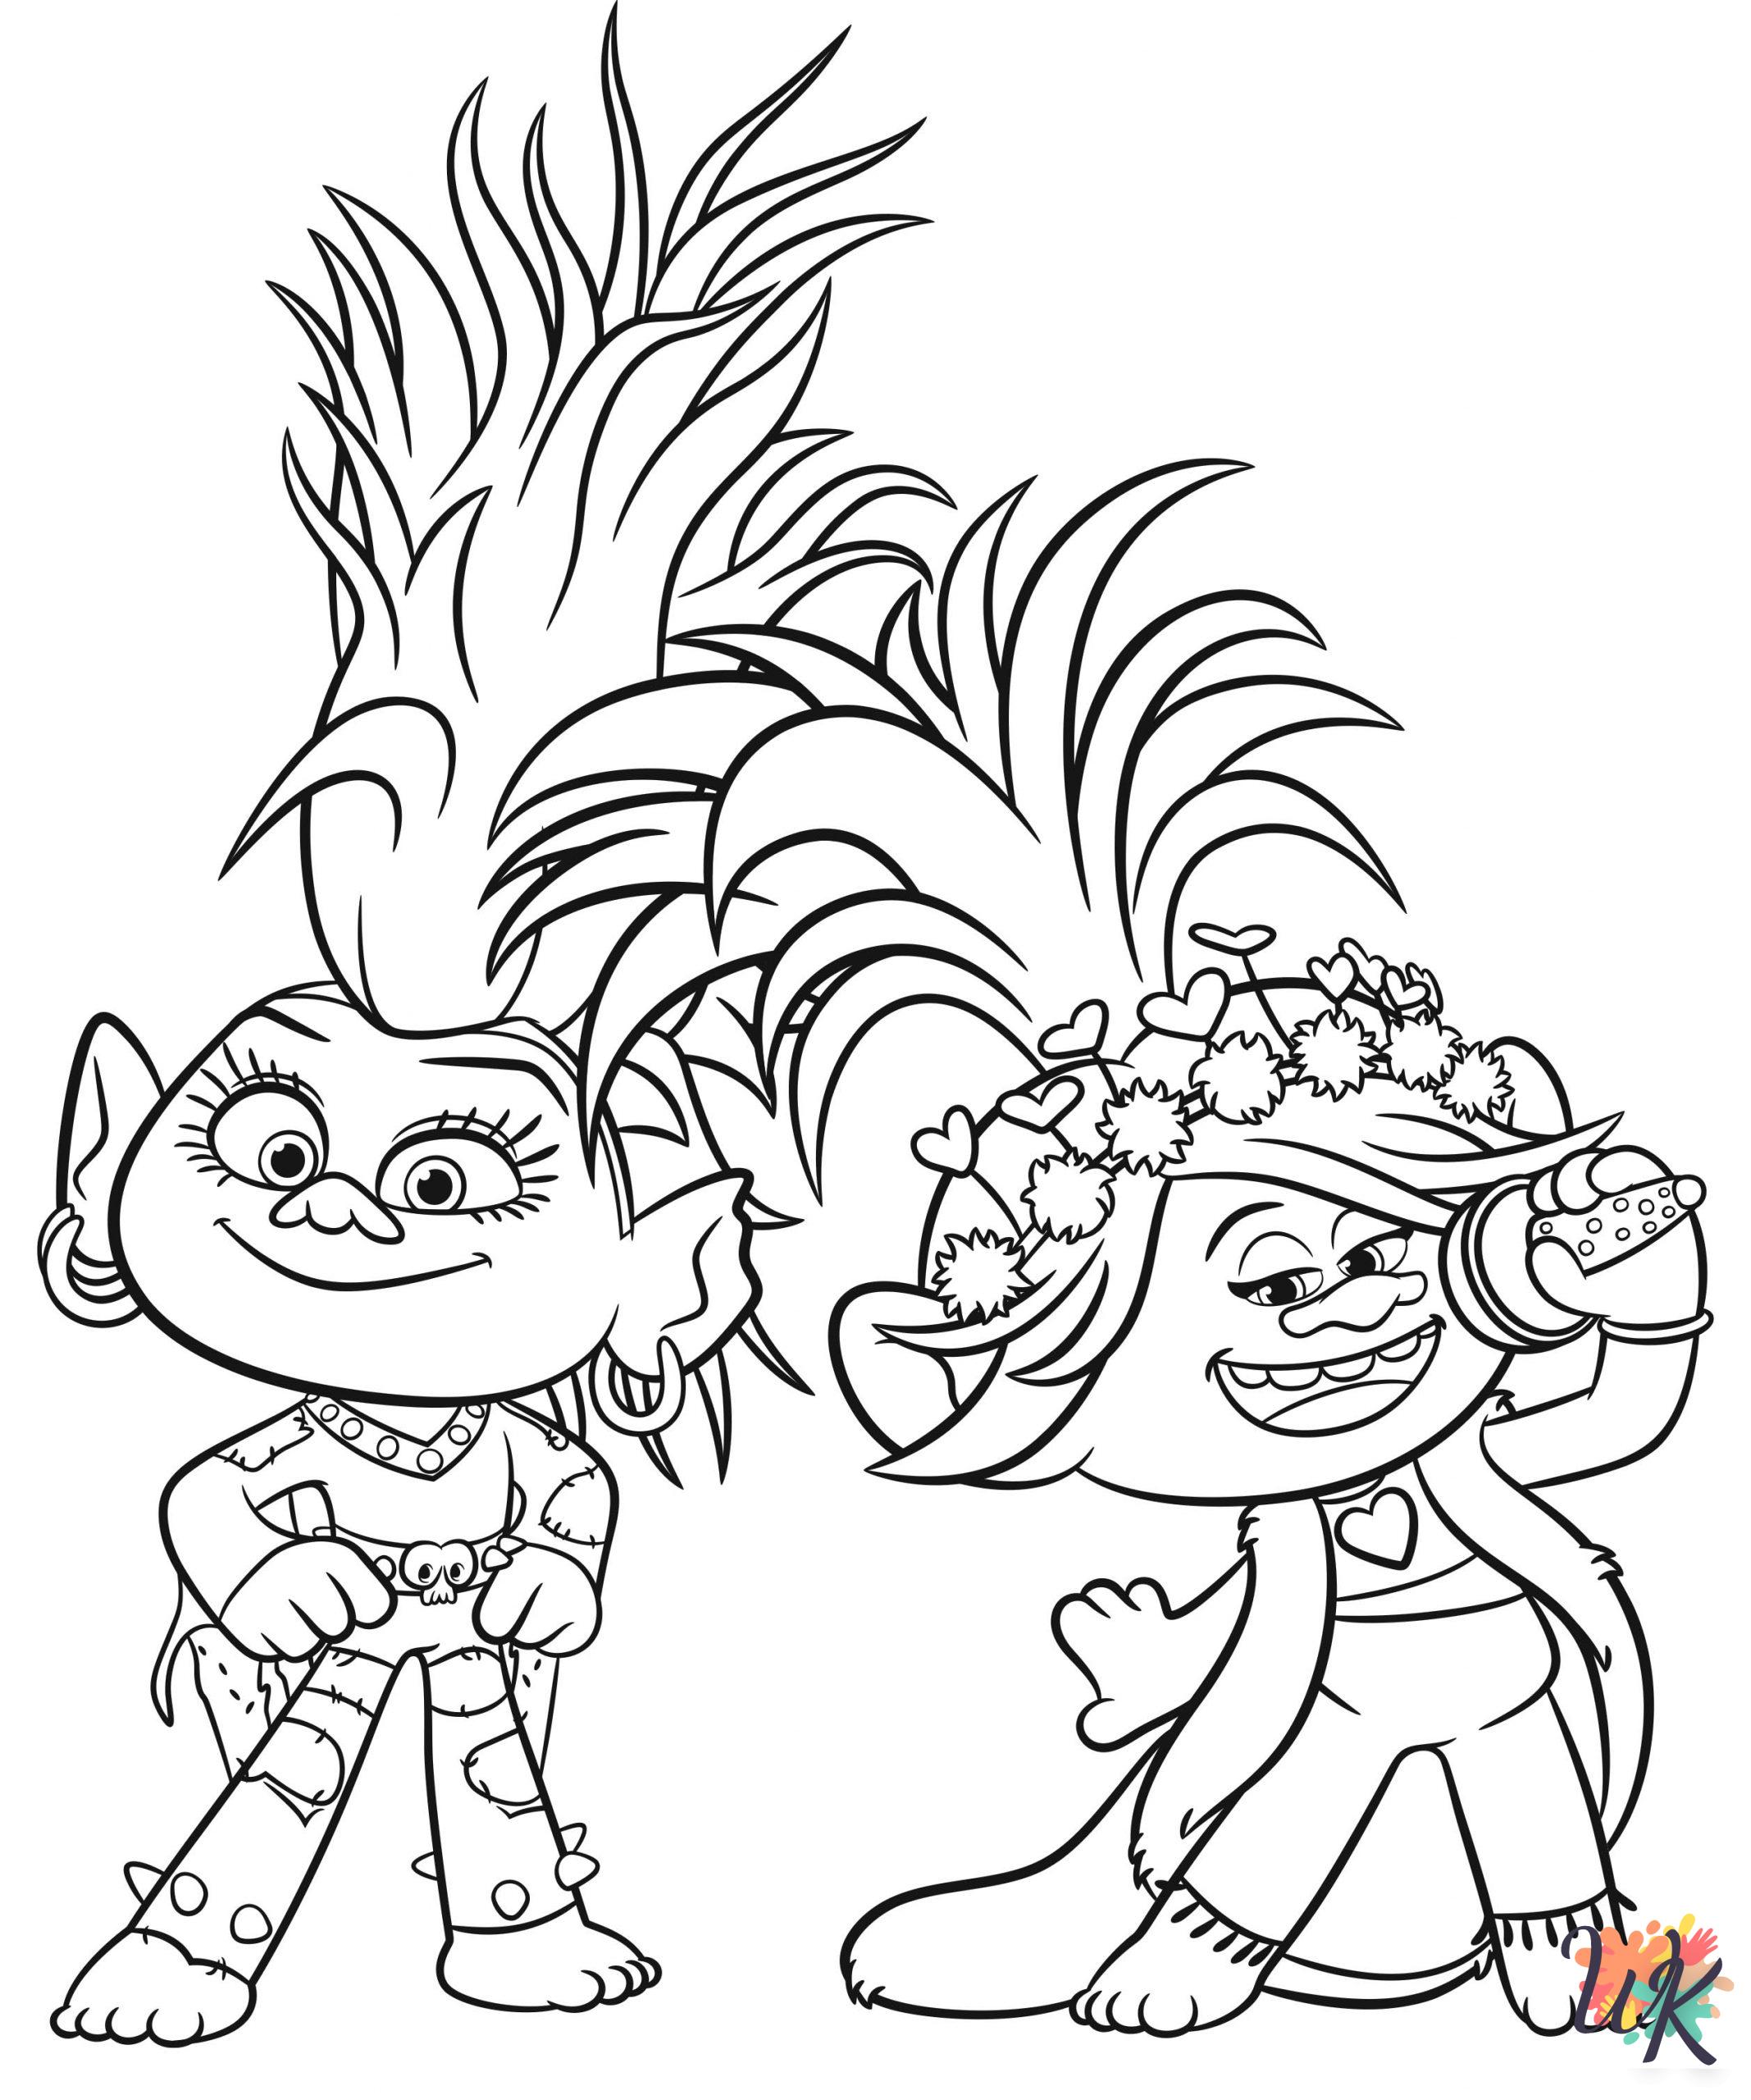 Trolls coloring pages for adults